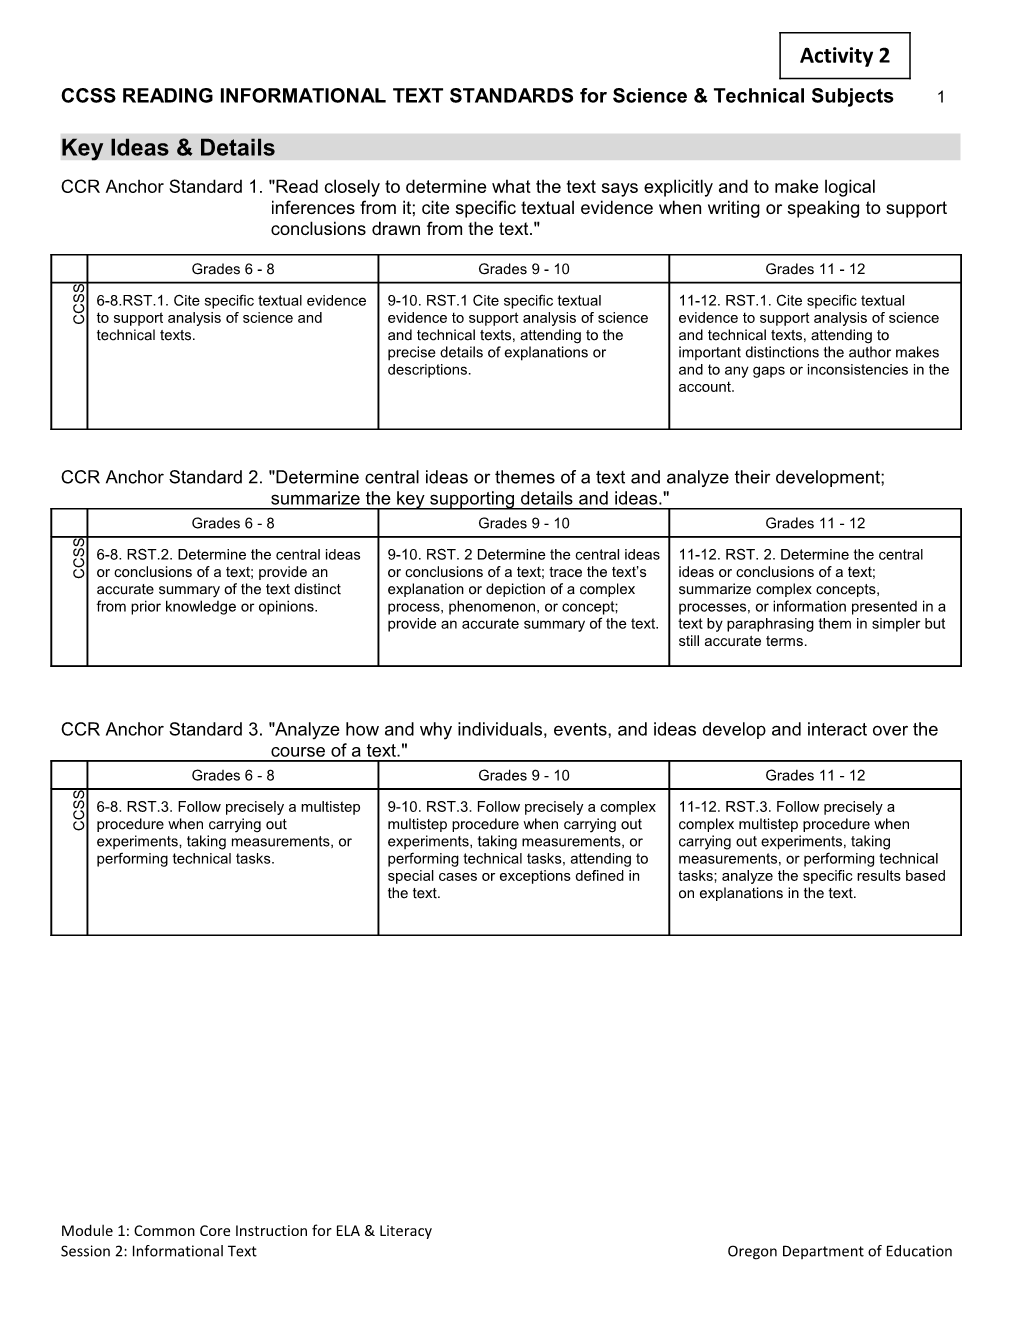 CCSS READING INFORMATIONAL TEXT STANDARDS for Science & Technical Subjects 1